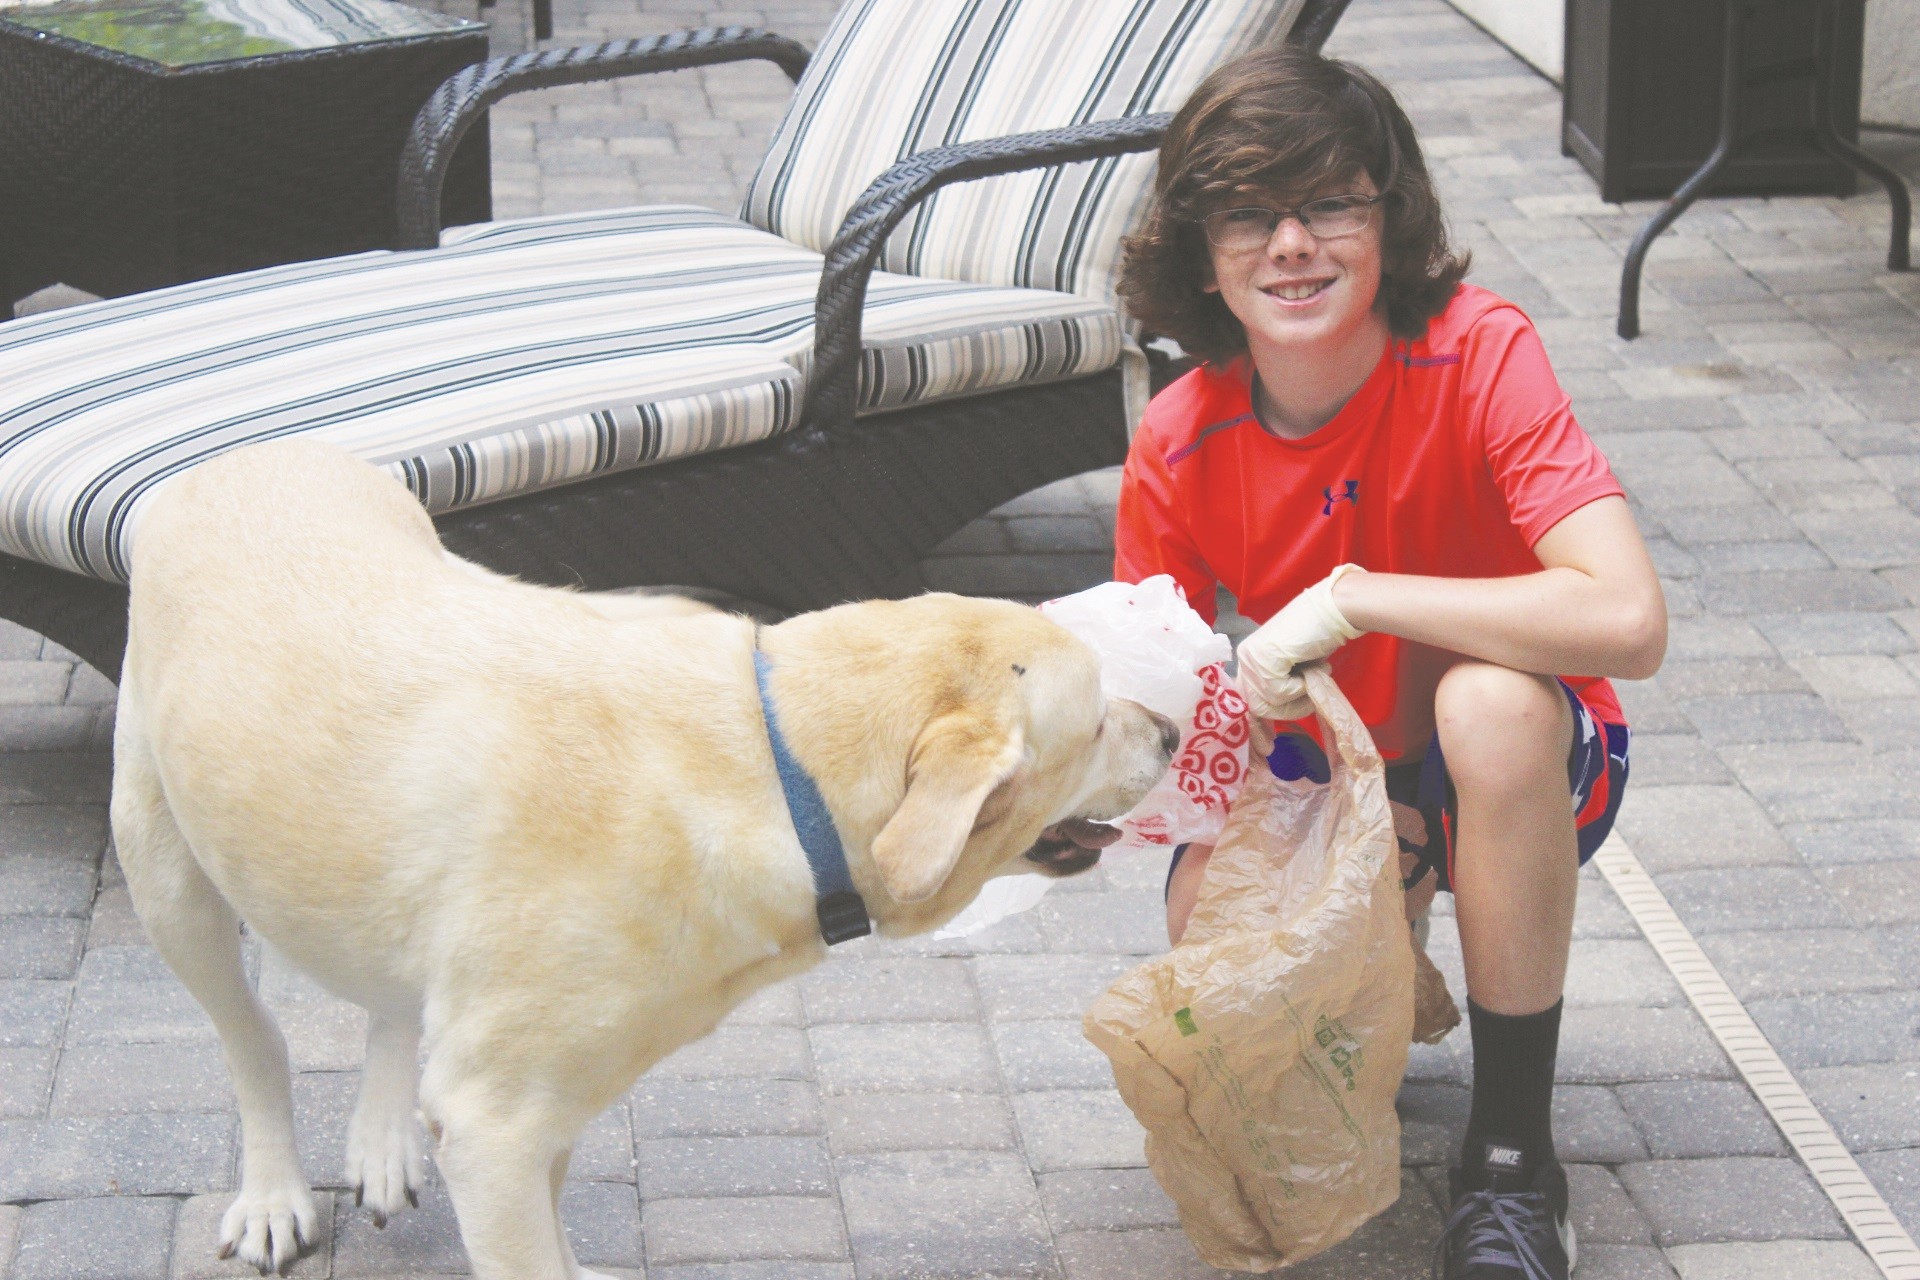 Kyle Graham scoops other dog’s poop for a living, but of course he picks up after his dog Tebow as well.